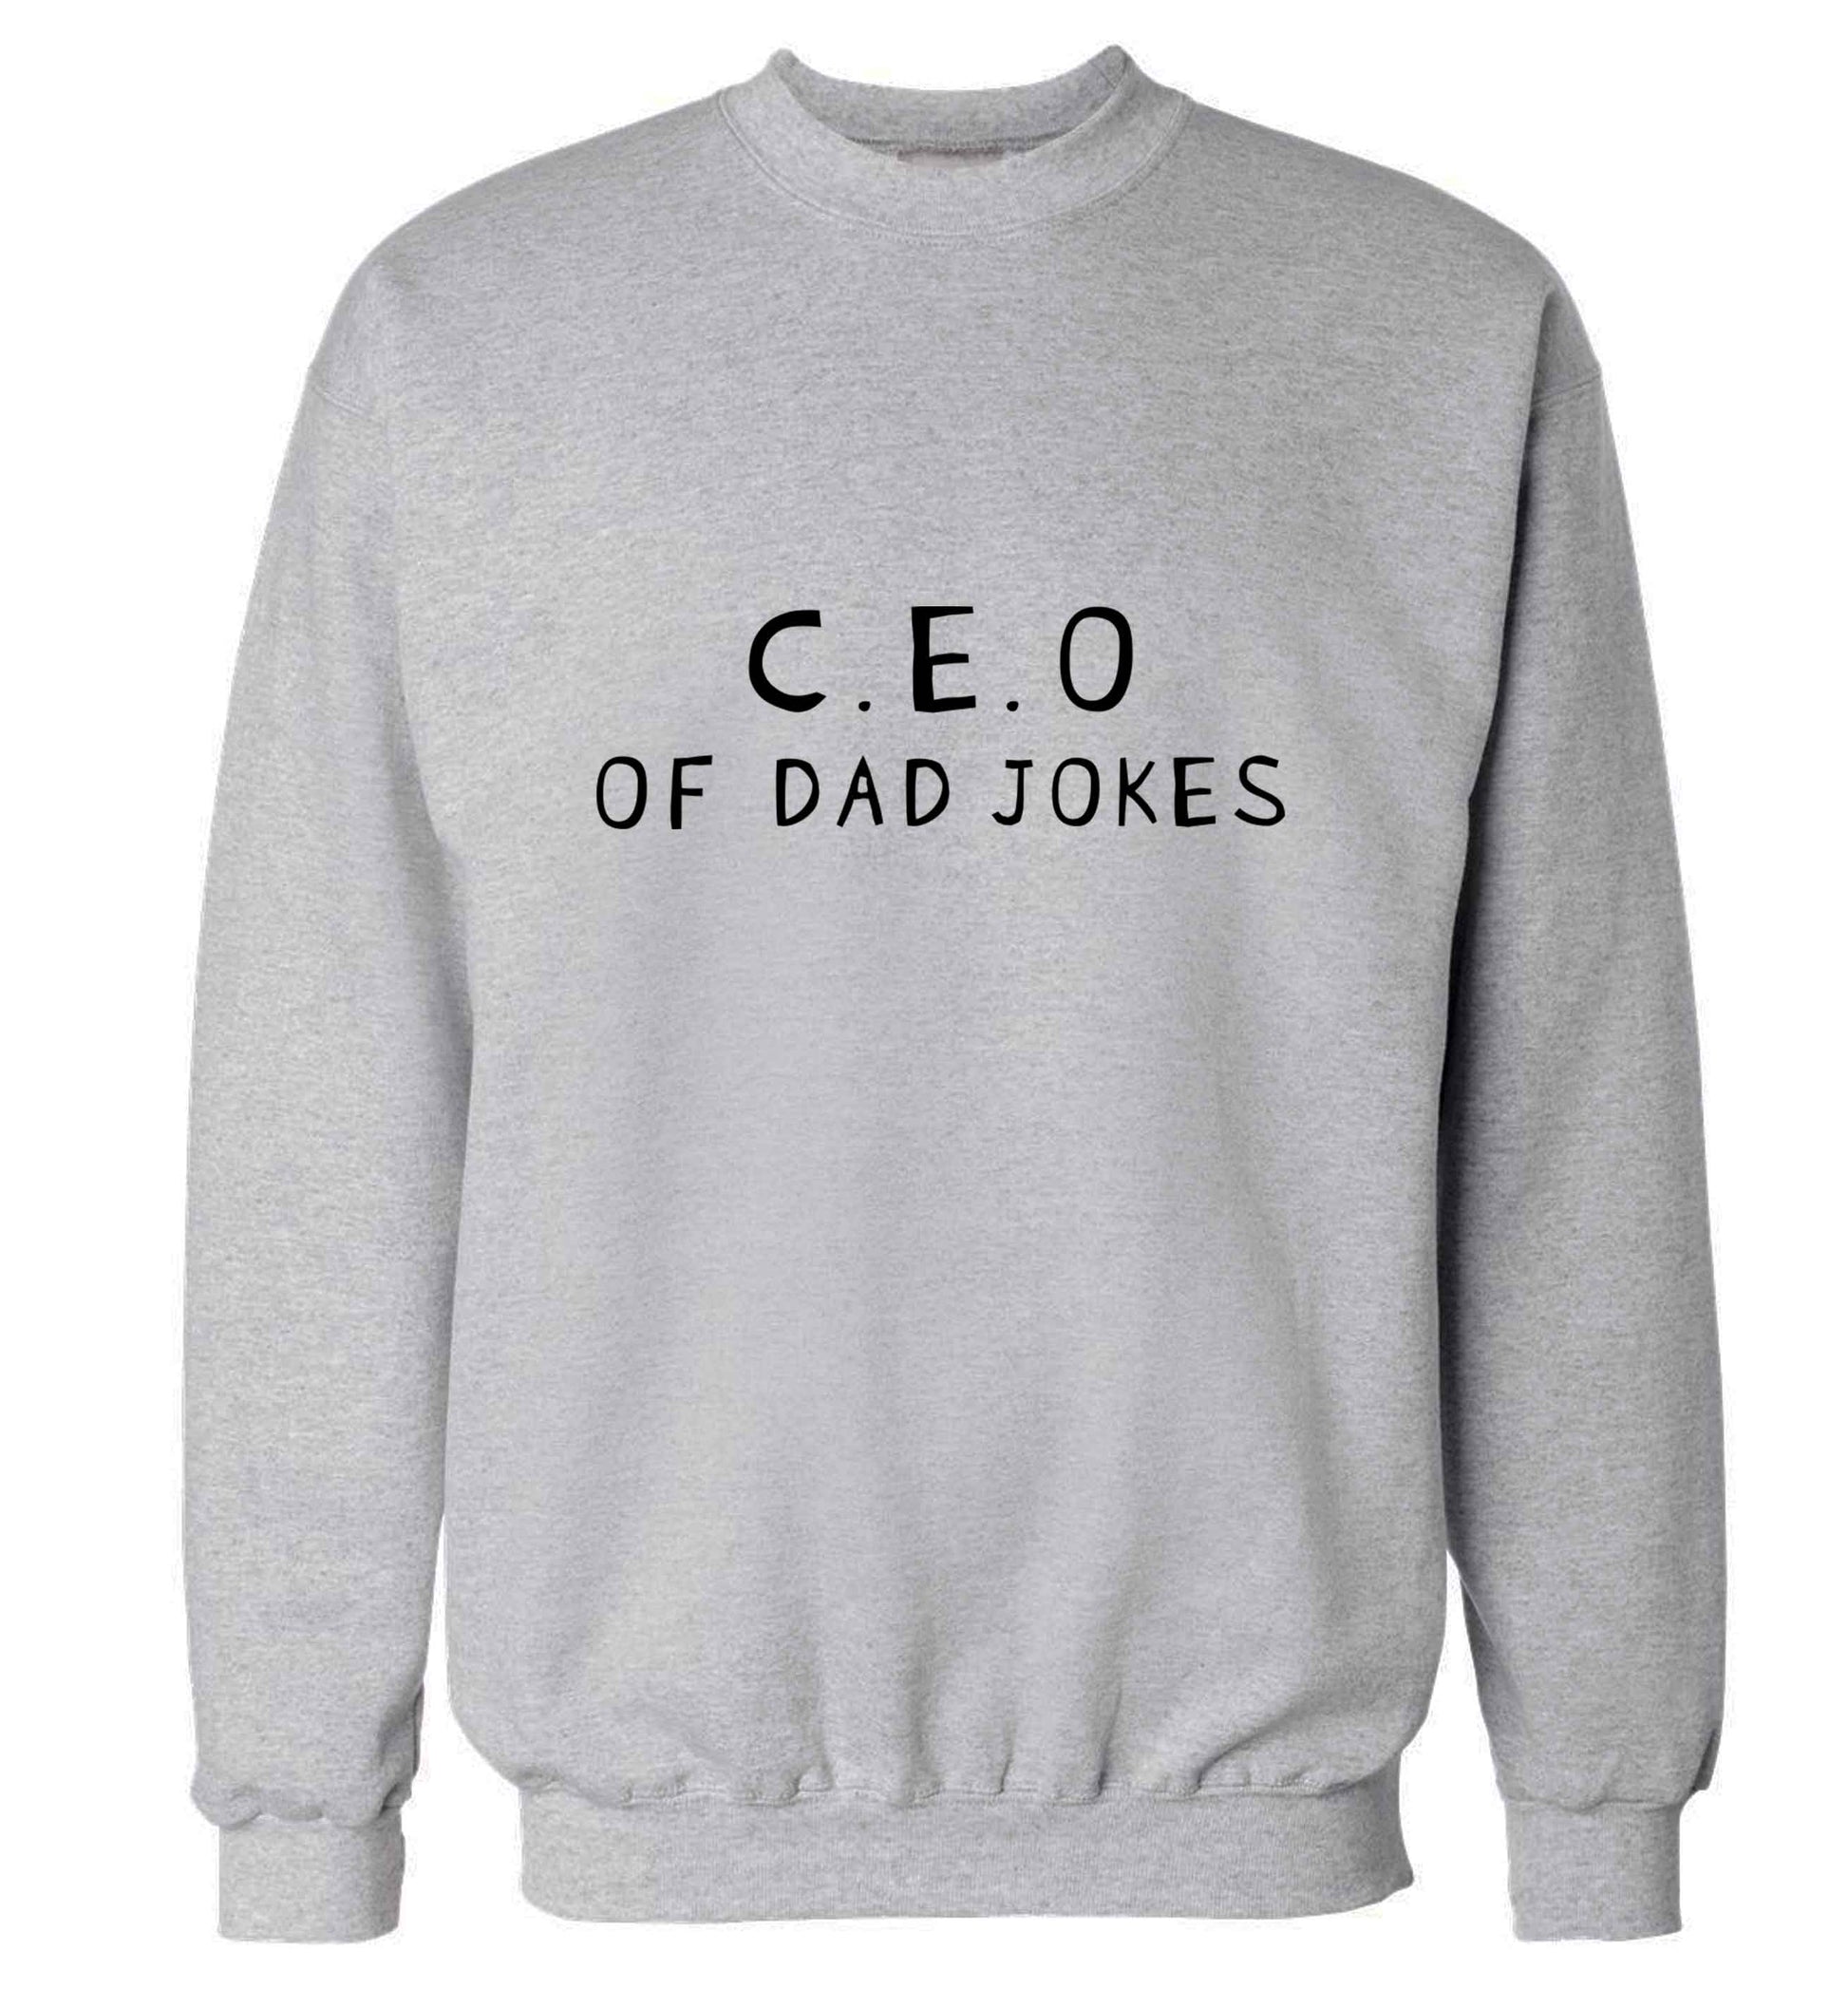 We love this for YOU! Who else loves saying this?!  adult's unisex grey sweater 2XL